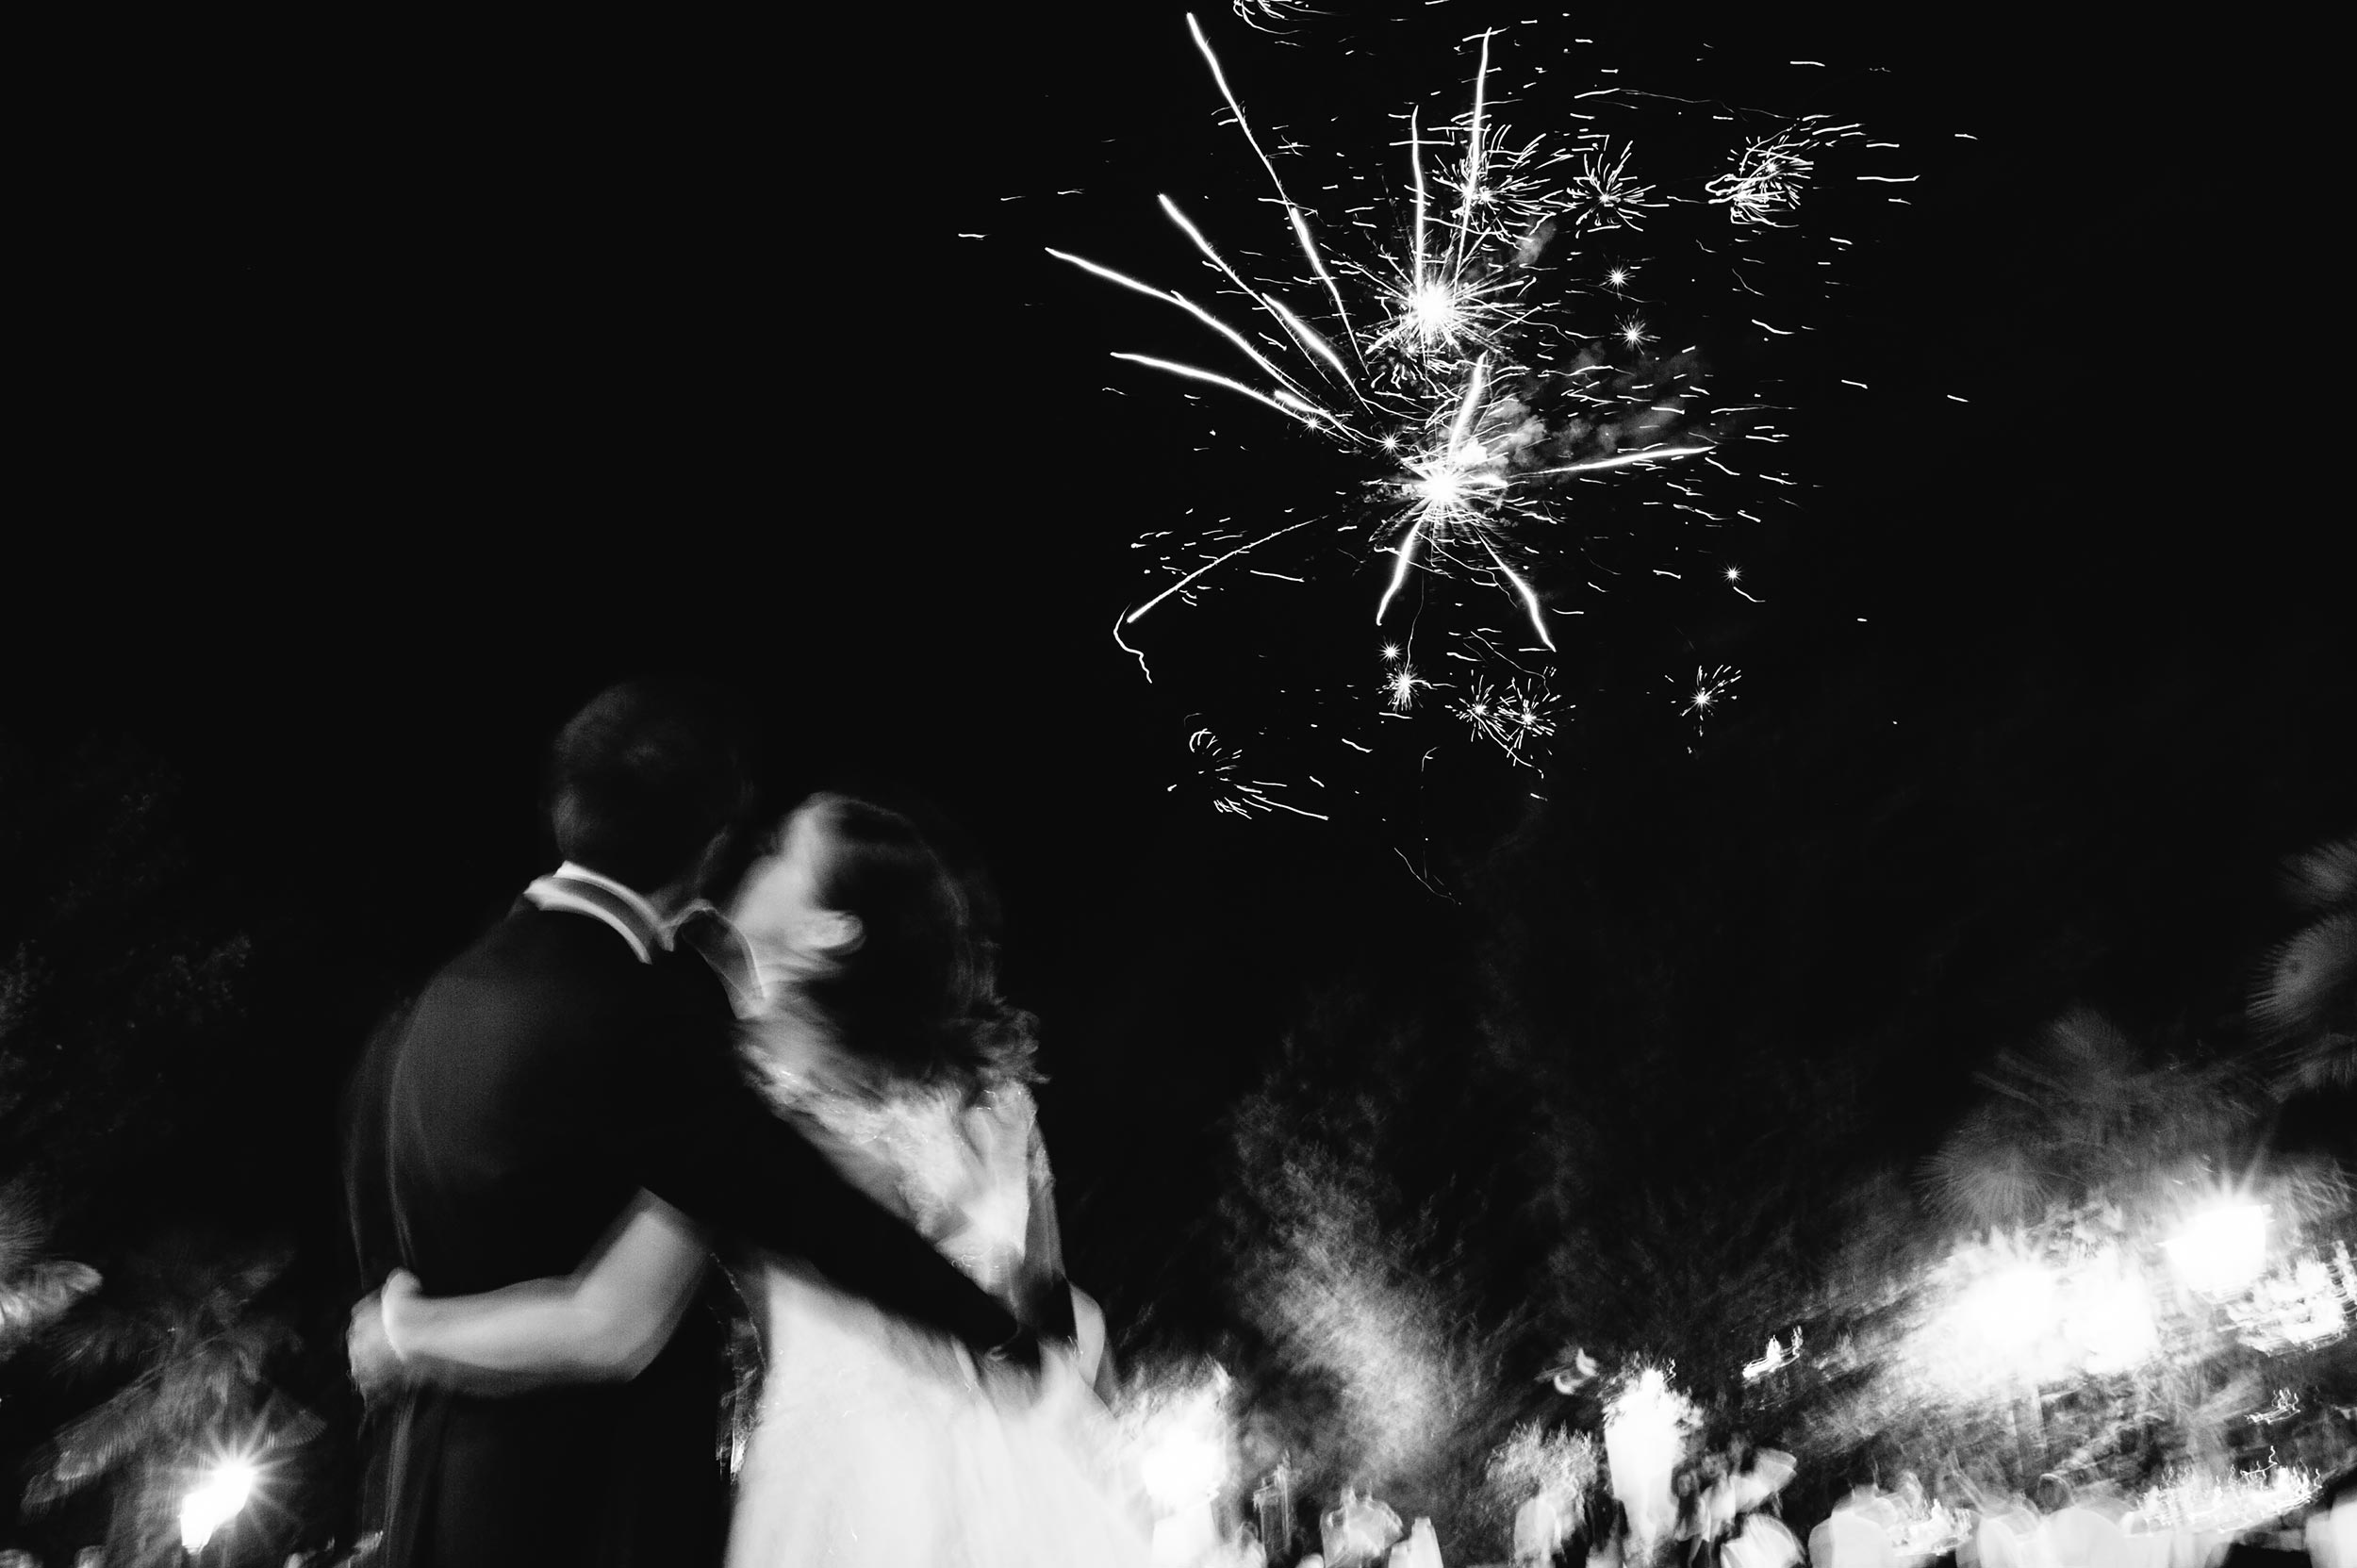 the-bride-kisses-the-groom-under-fireworks-black-and-white-wedding-photography.jpg